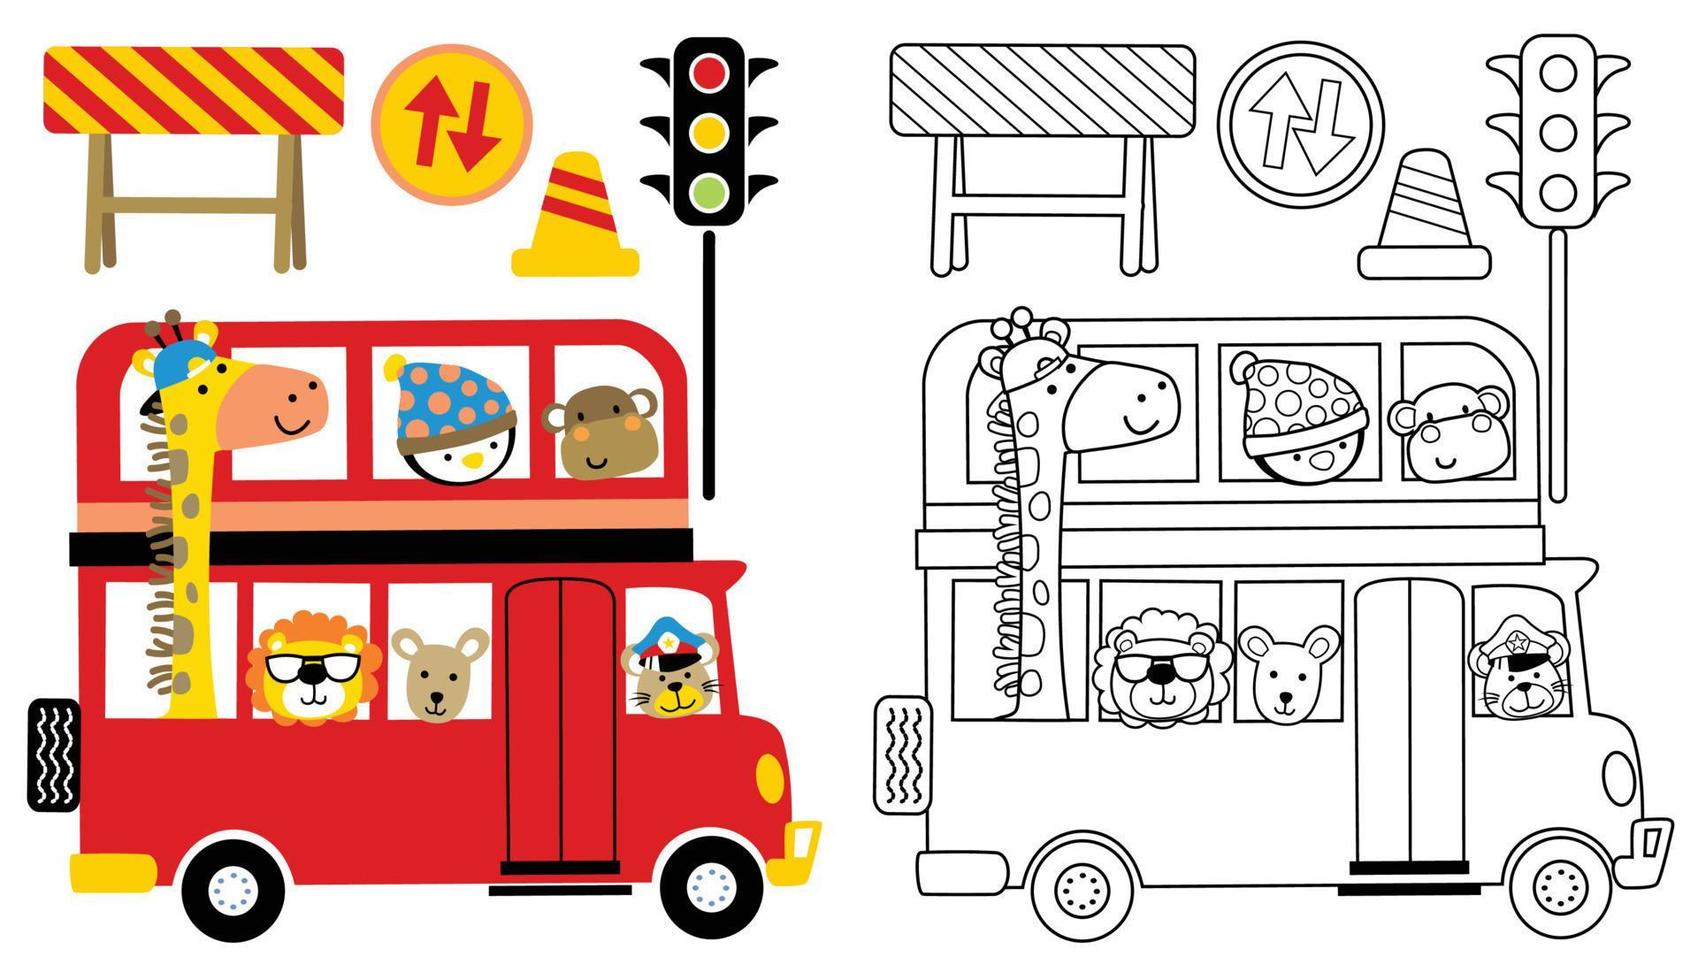 cute animals cartoon on red bus with traffic signs, coloring book or page vector